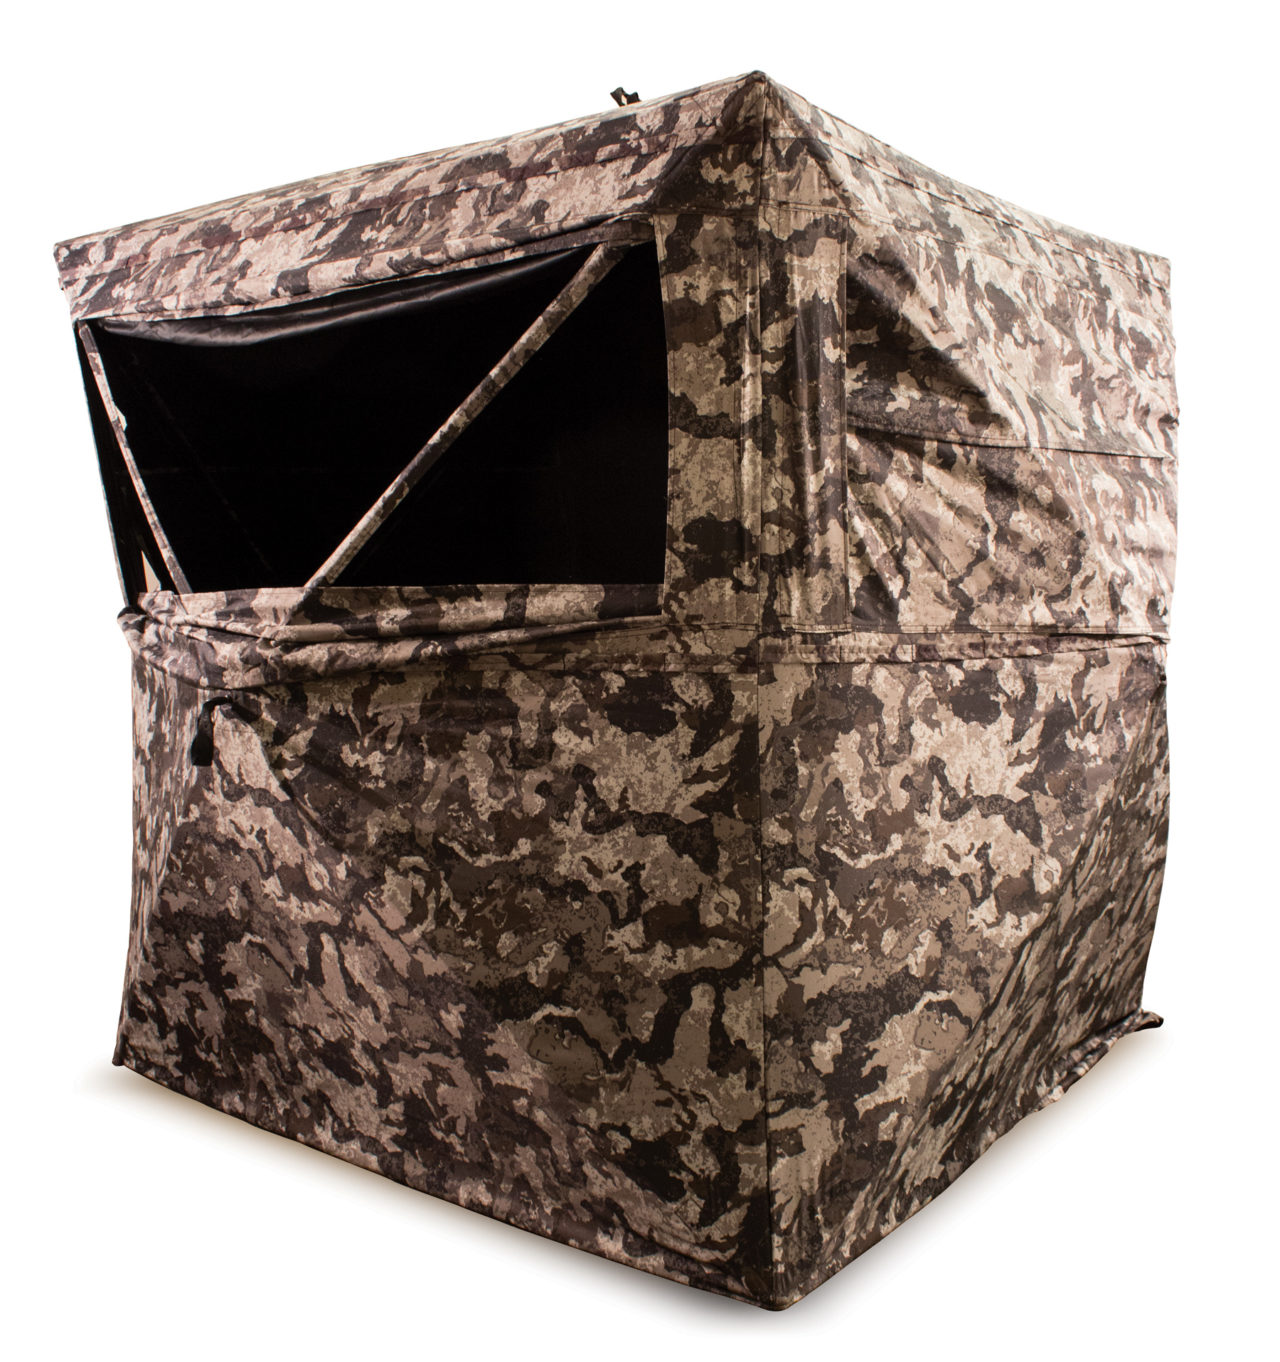 HME Announces New 3-Person Ground Blinds